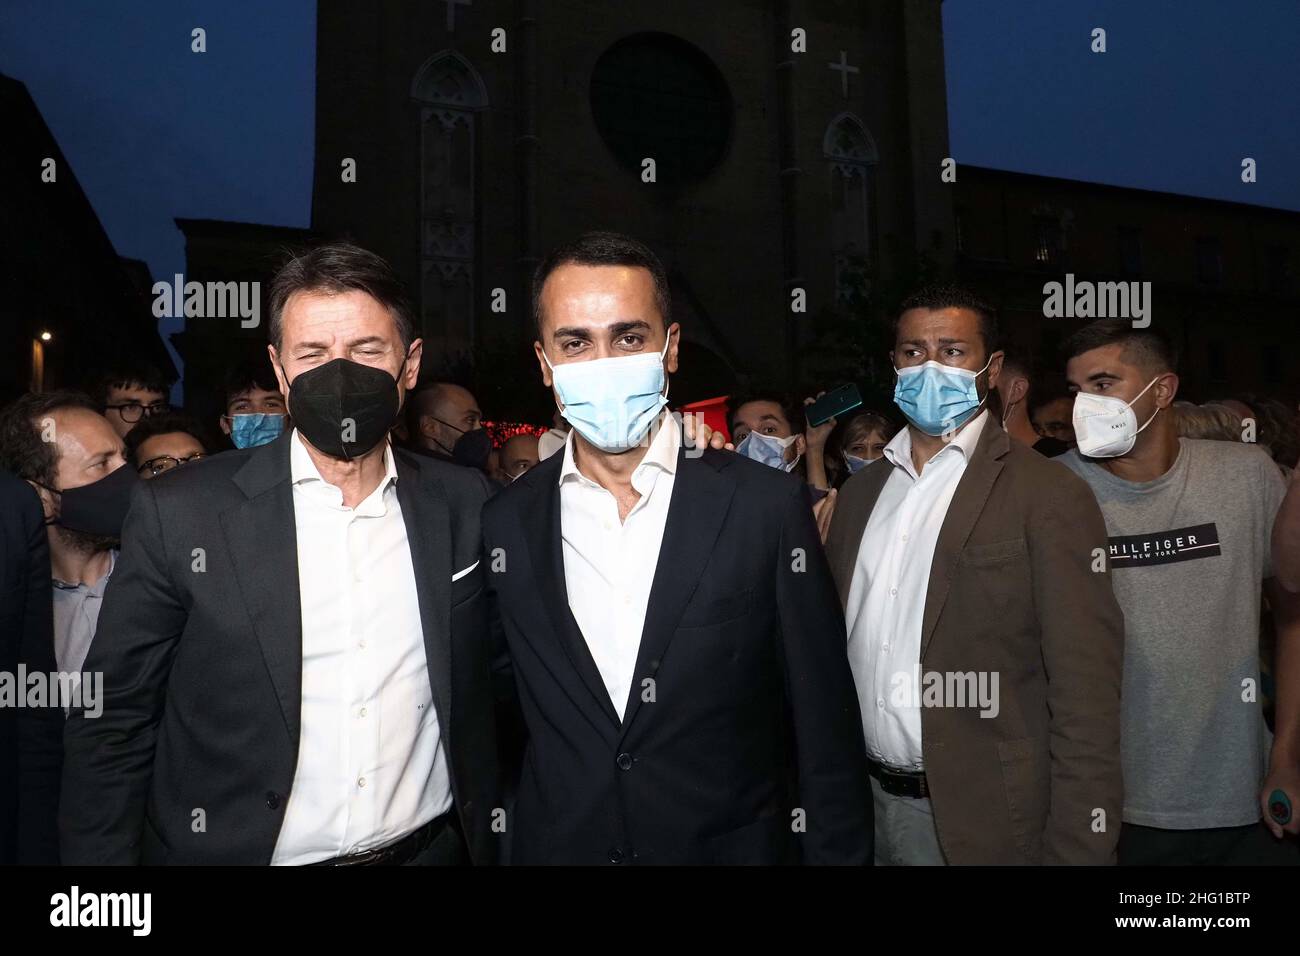 Michele Nucci/LaPresse September 10, 2021 - Bologna, Italy news Former Prime Minister Giuseppe Conte with Foreign Minister Luigi Di Maio and Bologna mayoral candidate Matteo Lepore on a tour of the city Stock Photo